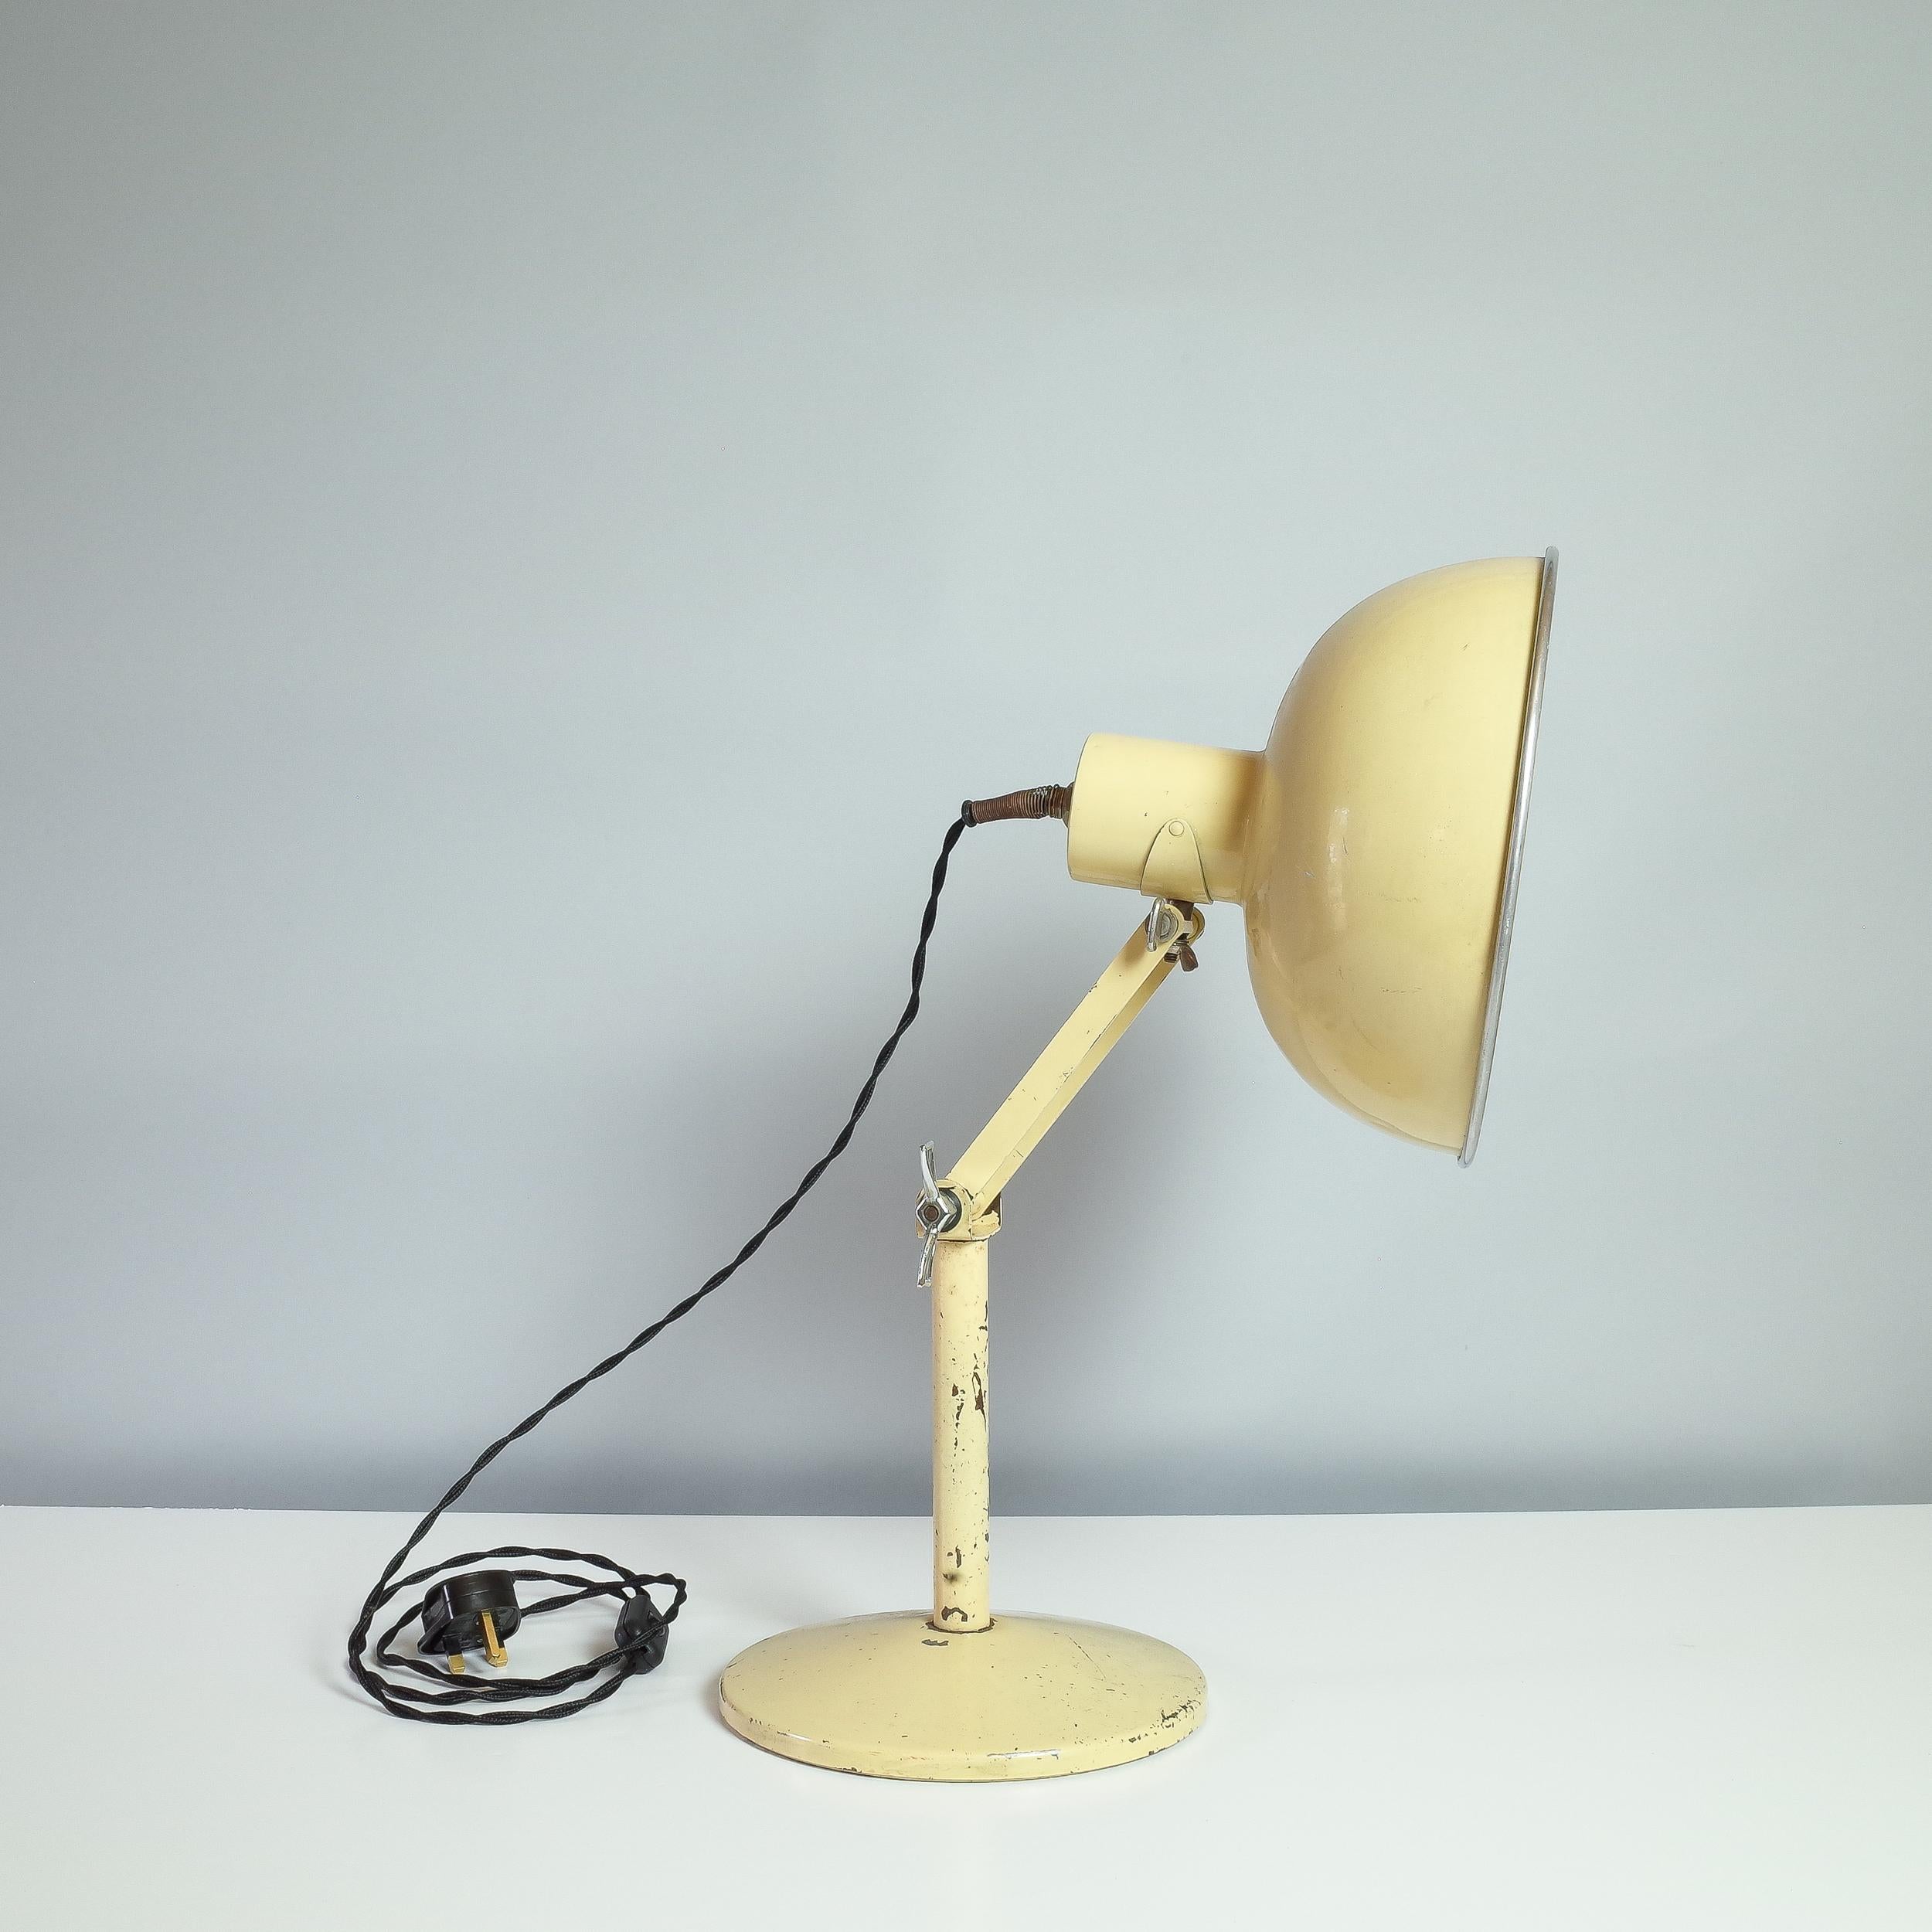 A 1930s industrial Radiaray lamp, made in England by Hinders Ltd, London. It is made of cream enamel with an adjustable wing nut fitting. Fully functioning, PAT tested.